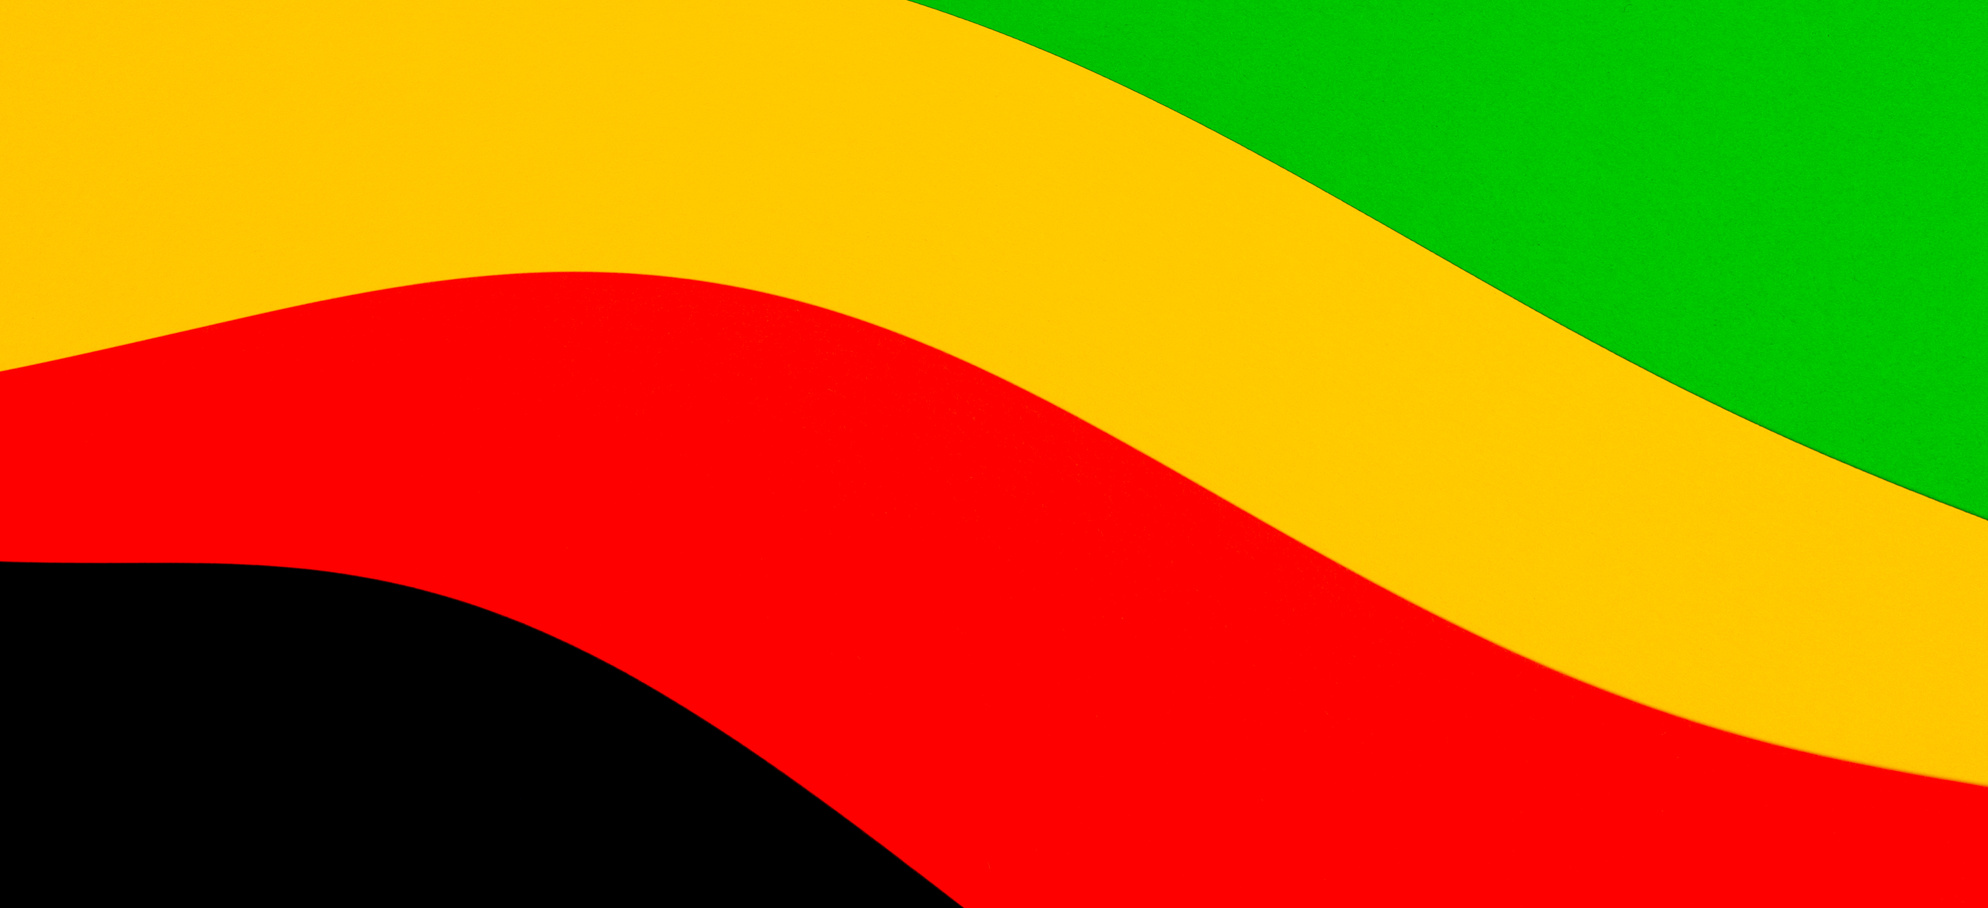 Abstract Black, Red, Yellow, and Green Color Background